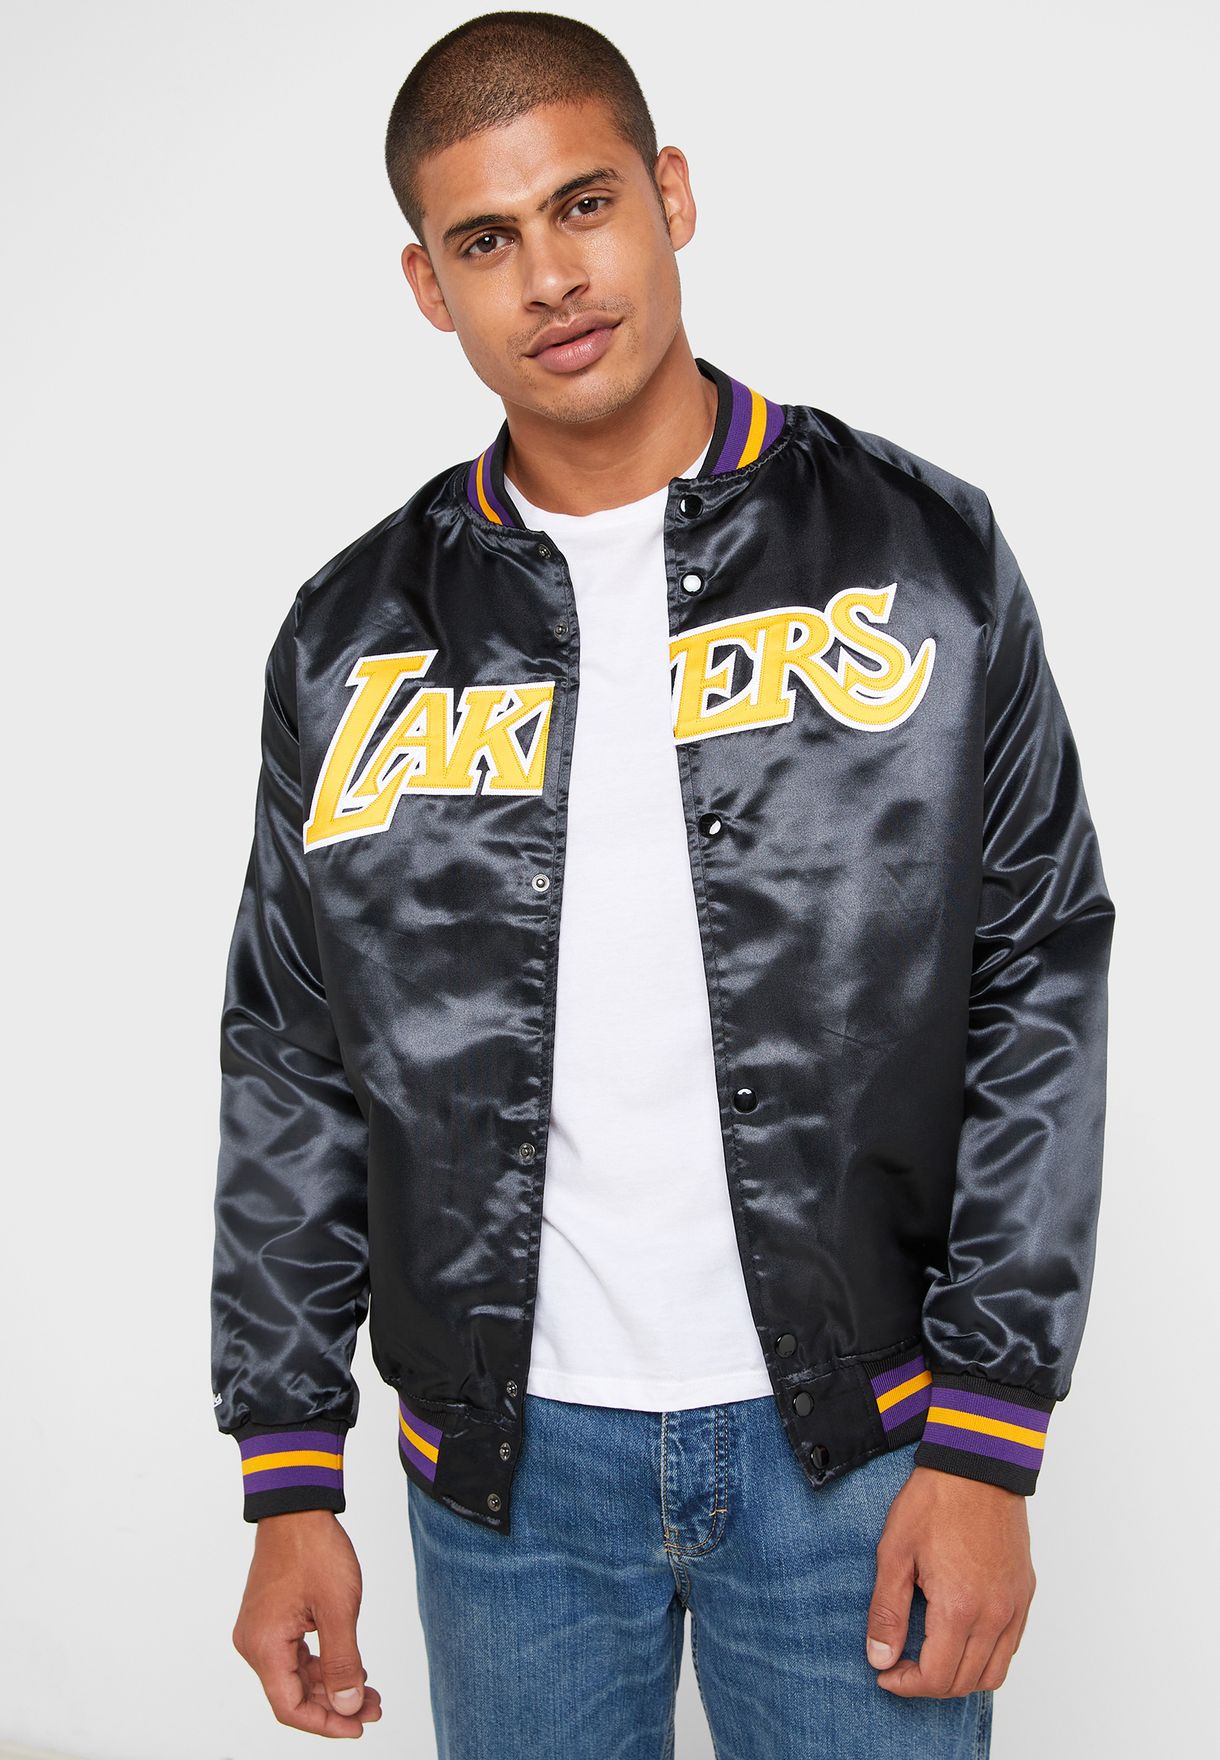 lakers jacket mitchell and ness